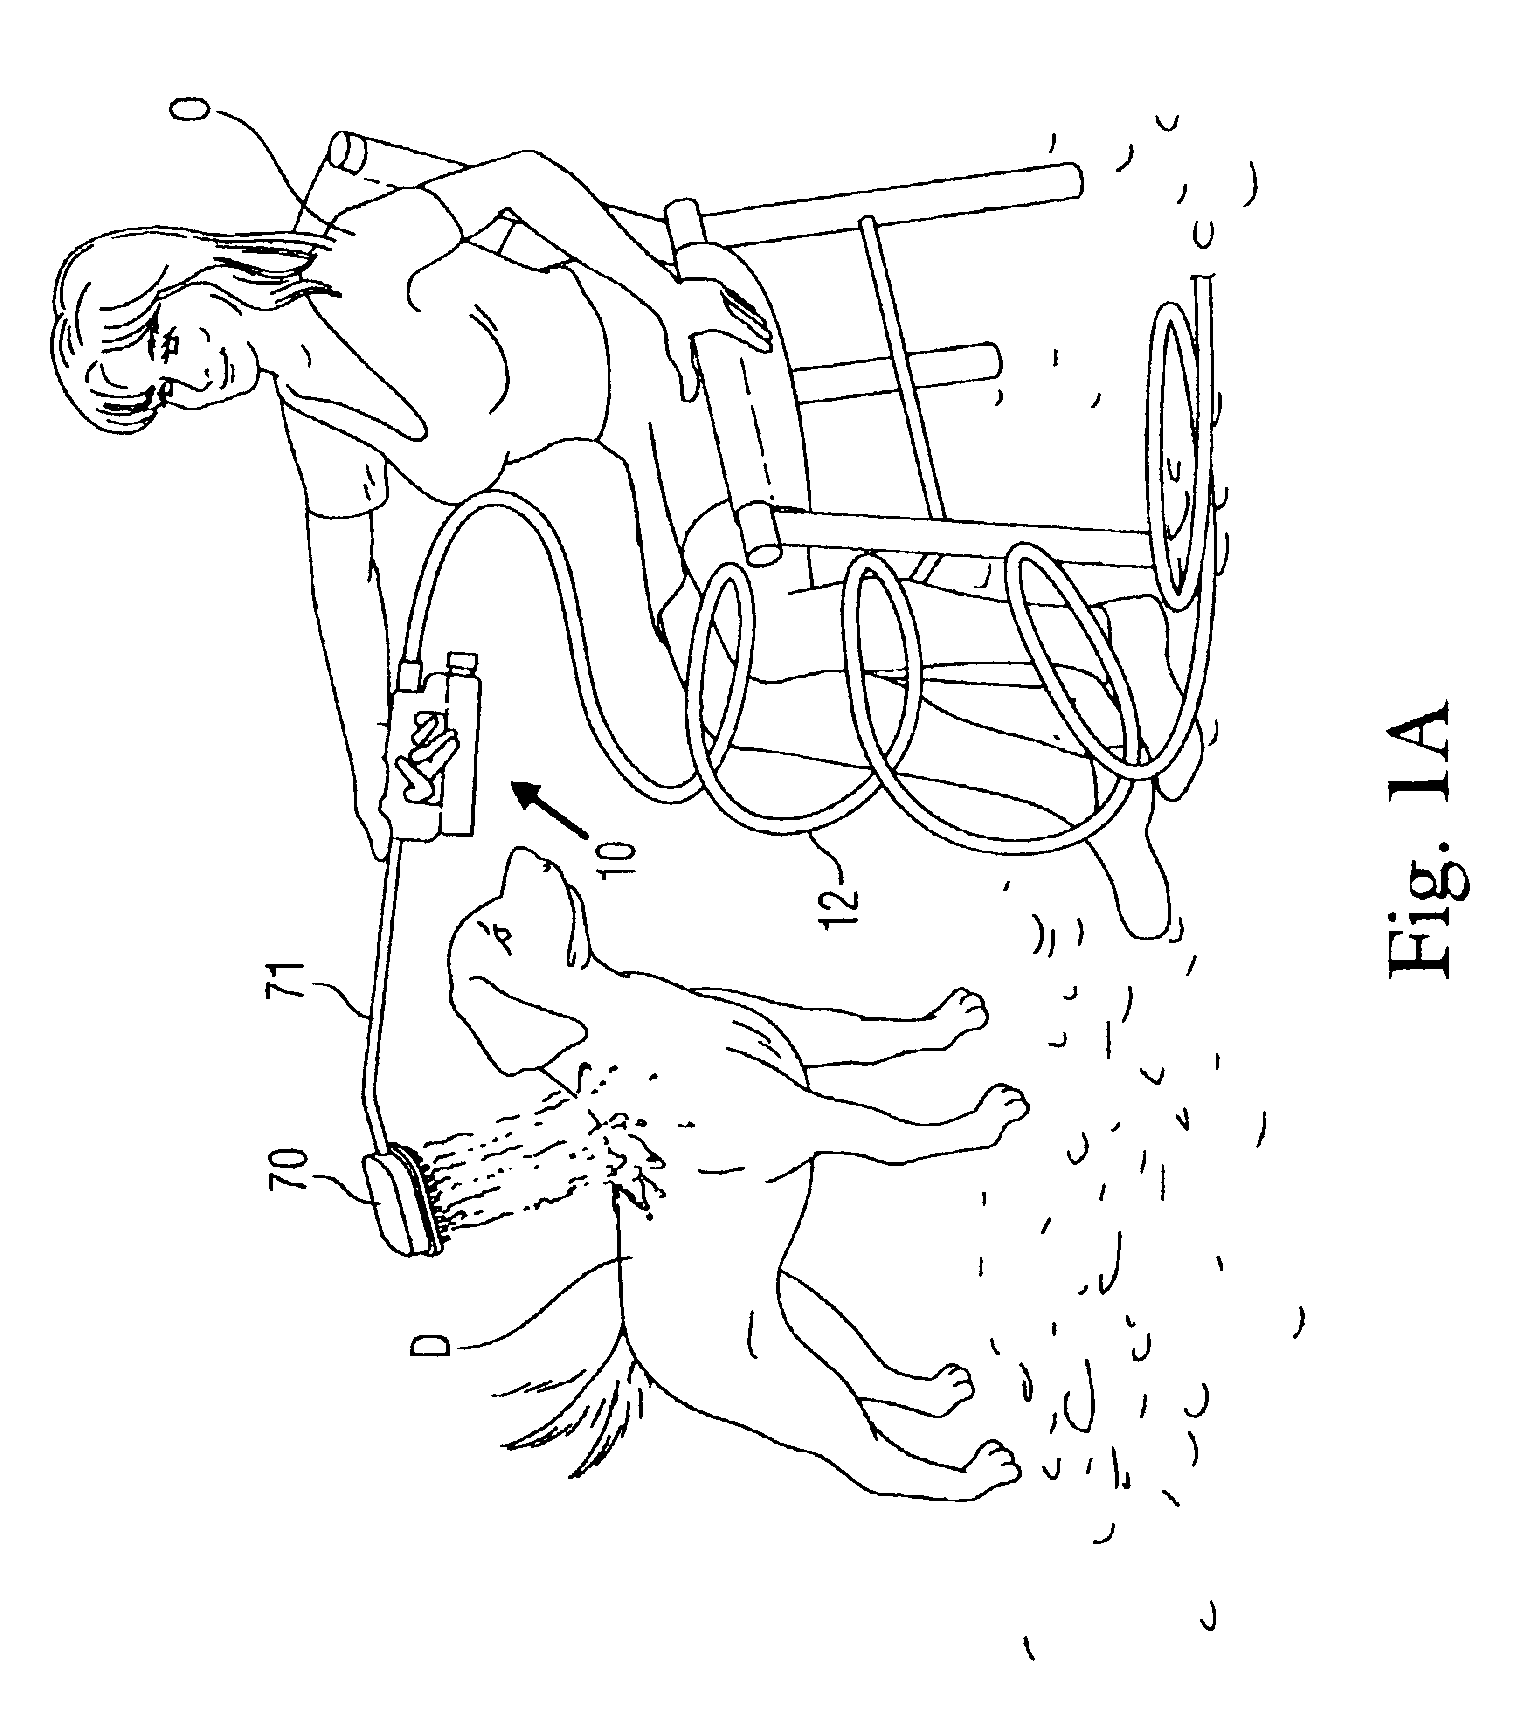 Apparatus and method for shampooing dogs, horses and other animals